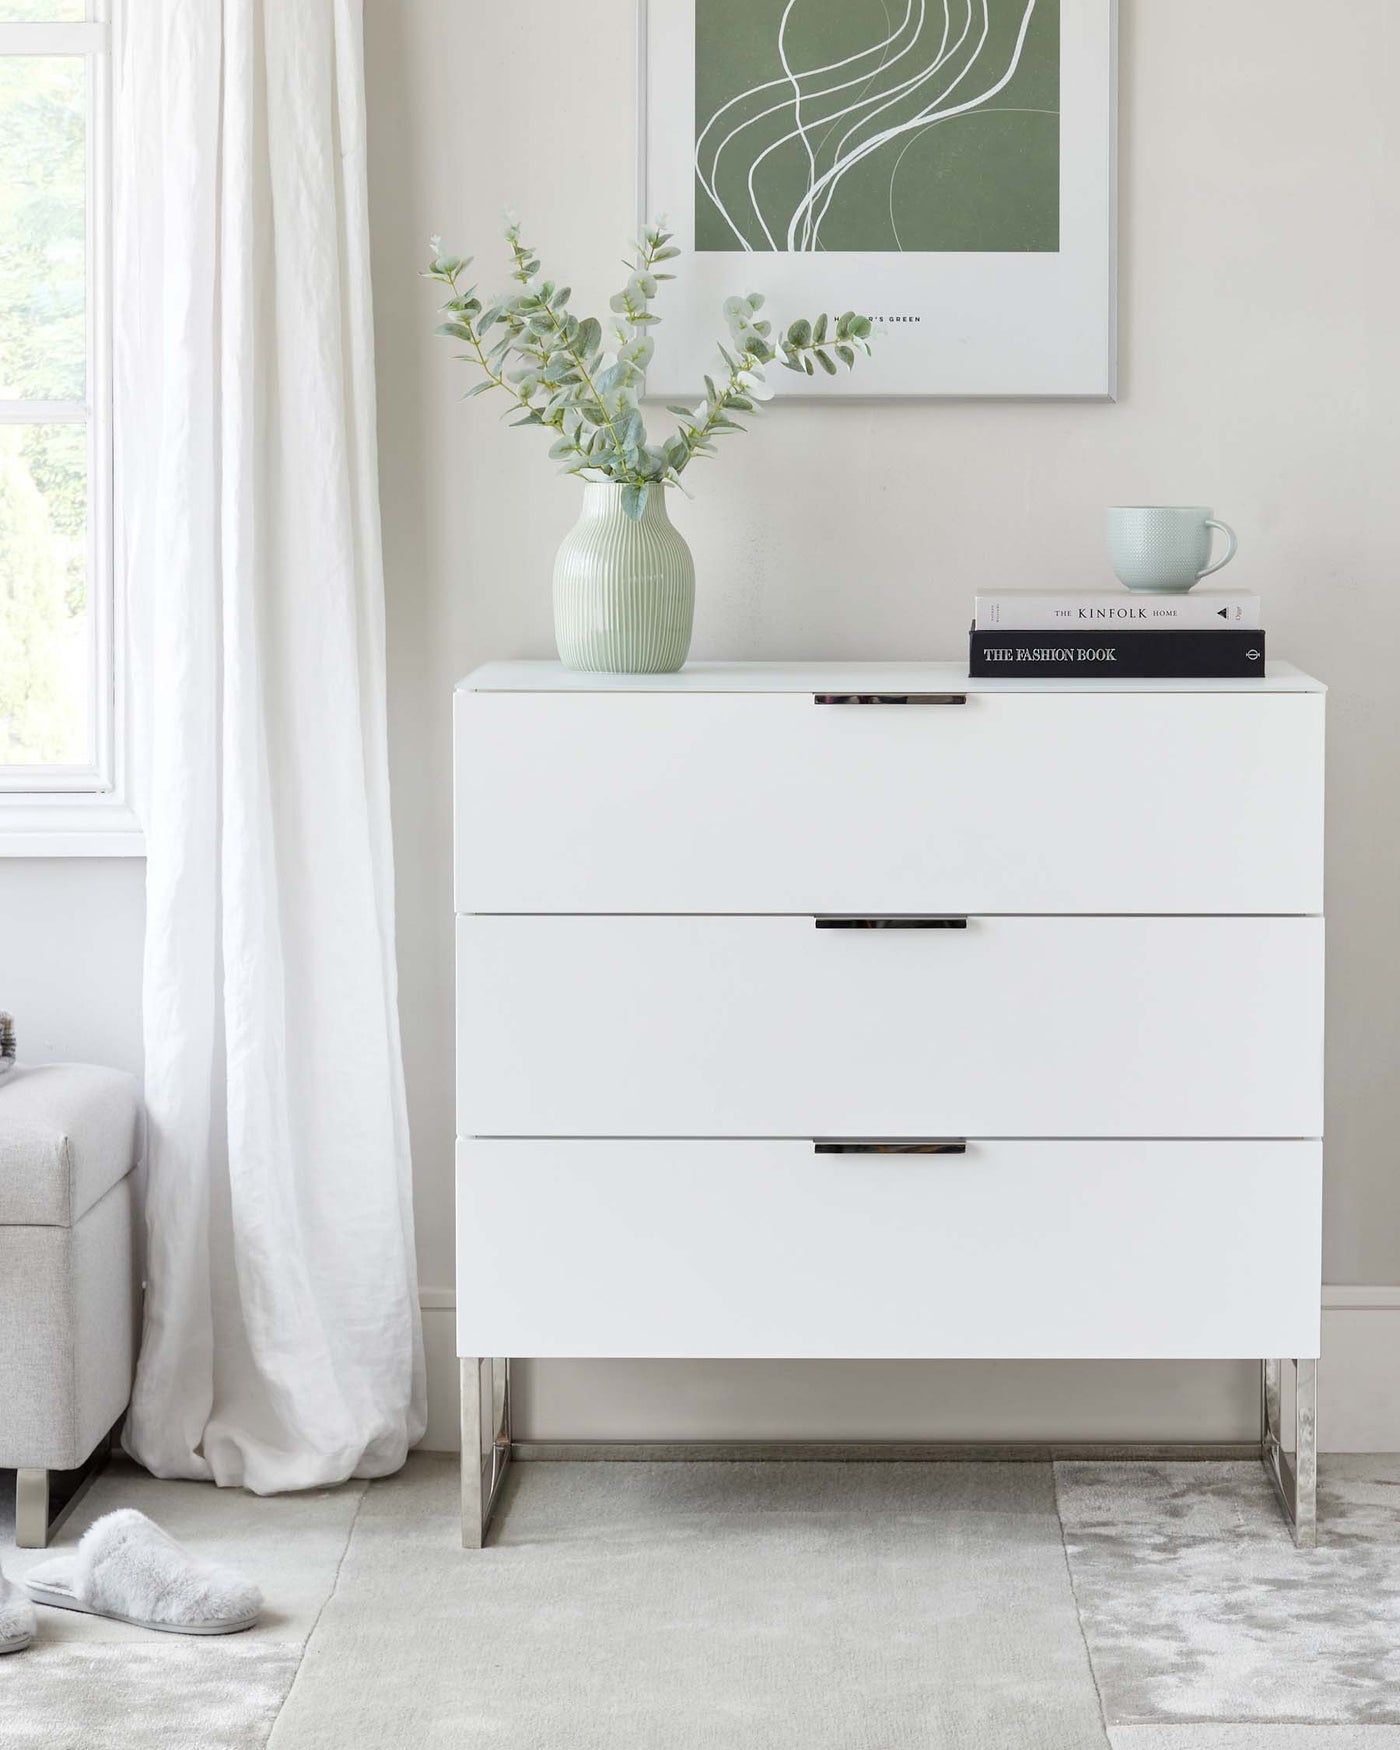 Modern white three-drawer dresser with sleek metal handles and minimalist metal legs, styled with a muted green vase with eucalyptus branches, two stacked books, and a light blue coffee cup on top, in a bright room with a grey upholstered bench, white curtains, and plush carpet flooring.